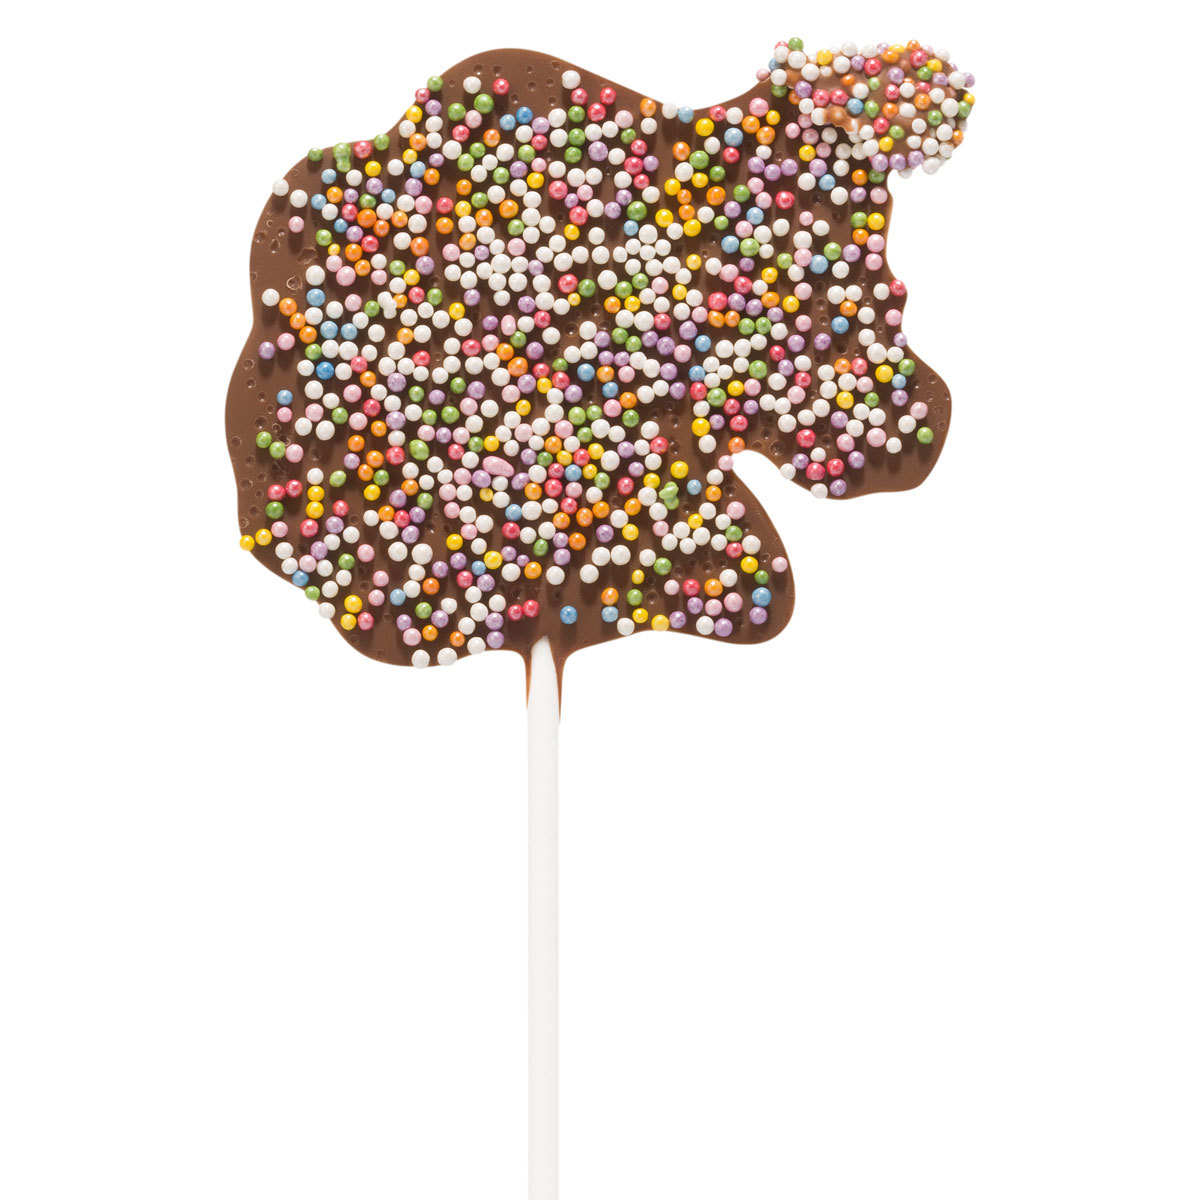 One reverse view of Lollipop with sprinkles